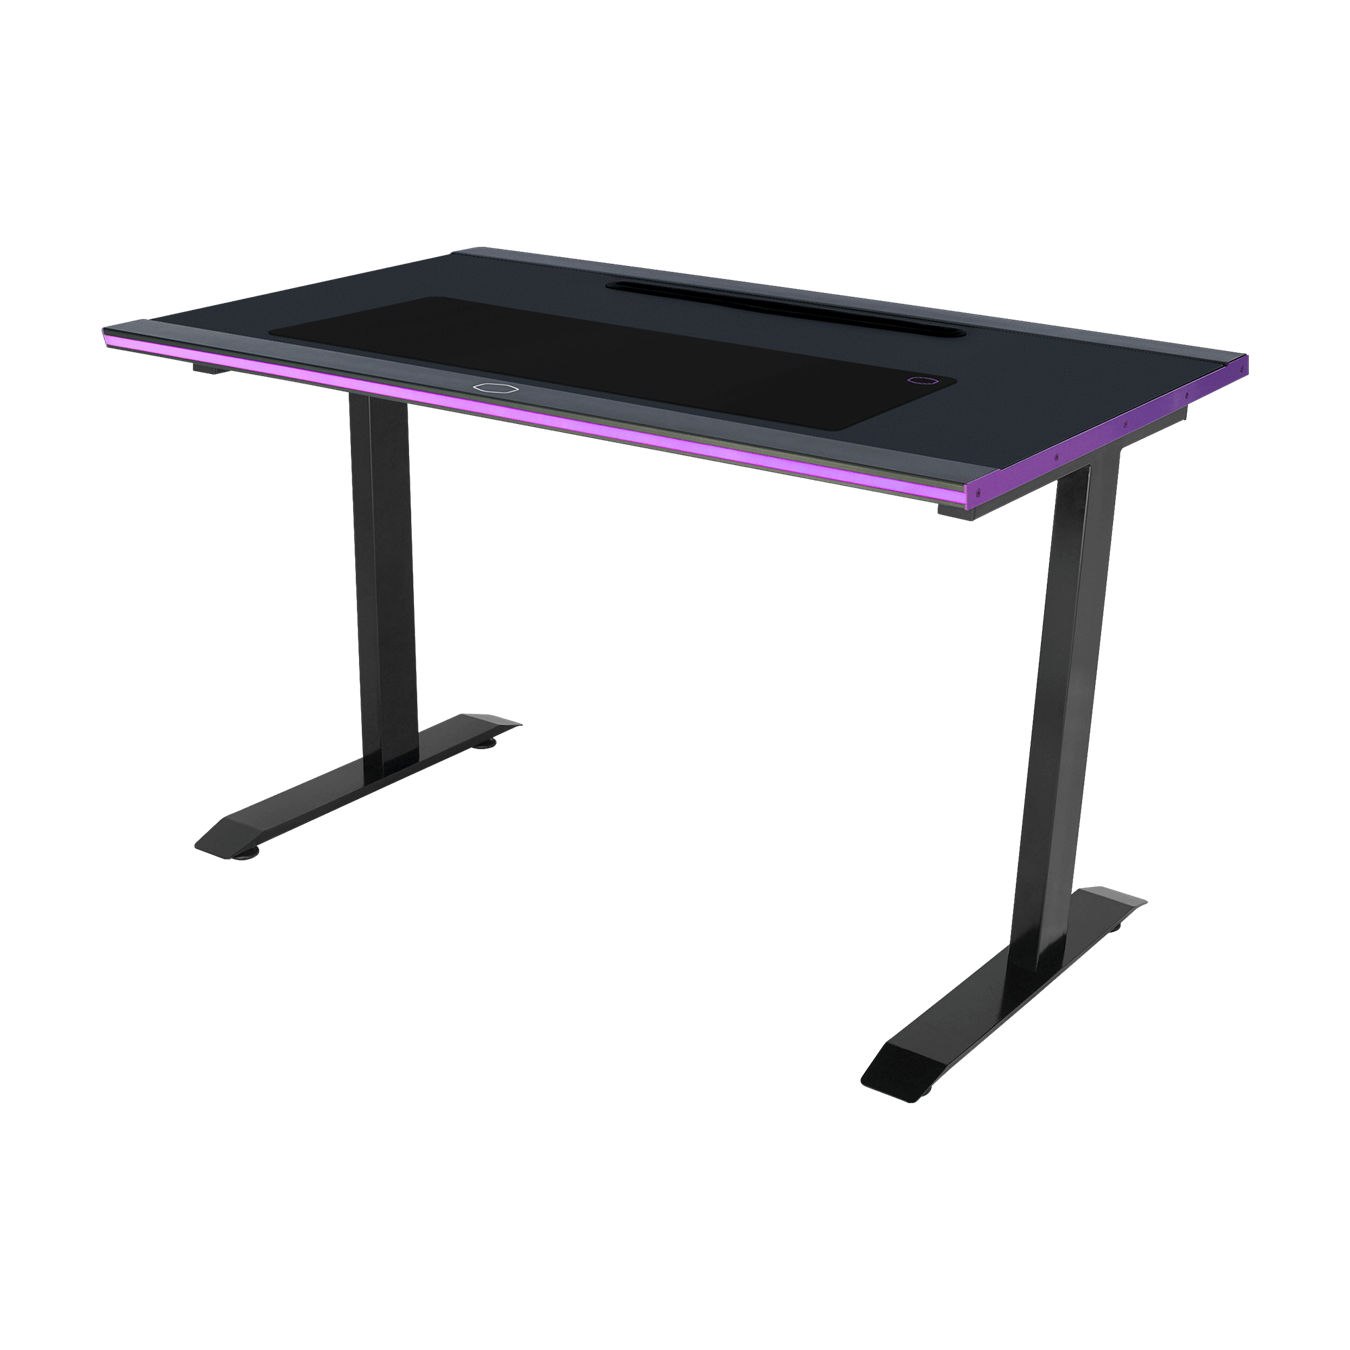 GD120 ARGB Gaming Desk - 45 degree angle of right tilt front view with purple LED lights